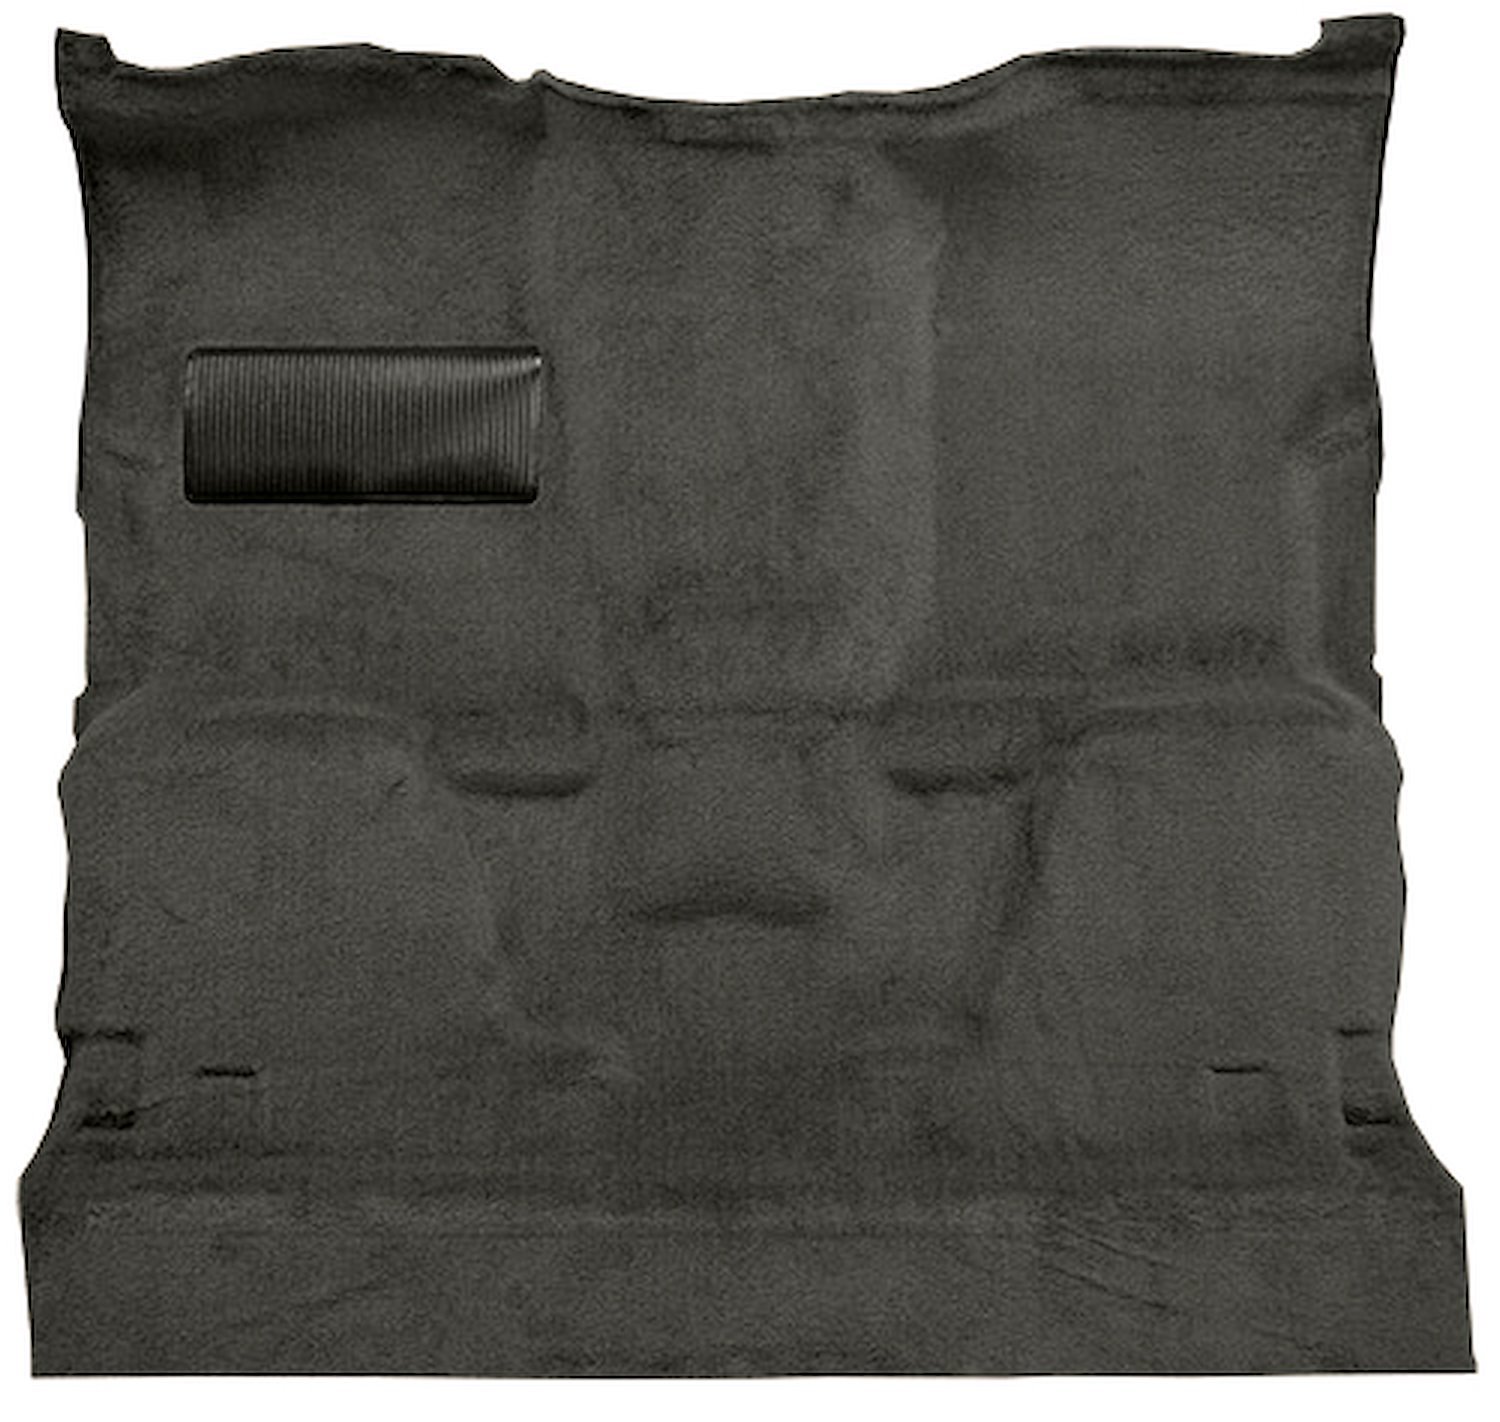 Molded Cut Pile Carpet for 1981-1986 GM C Series Regular Cab Trucks w/Automatic or 3-Speed [Mass Backing Charcoal]